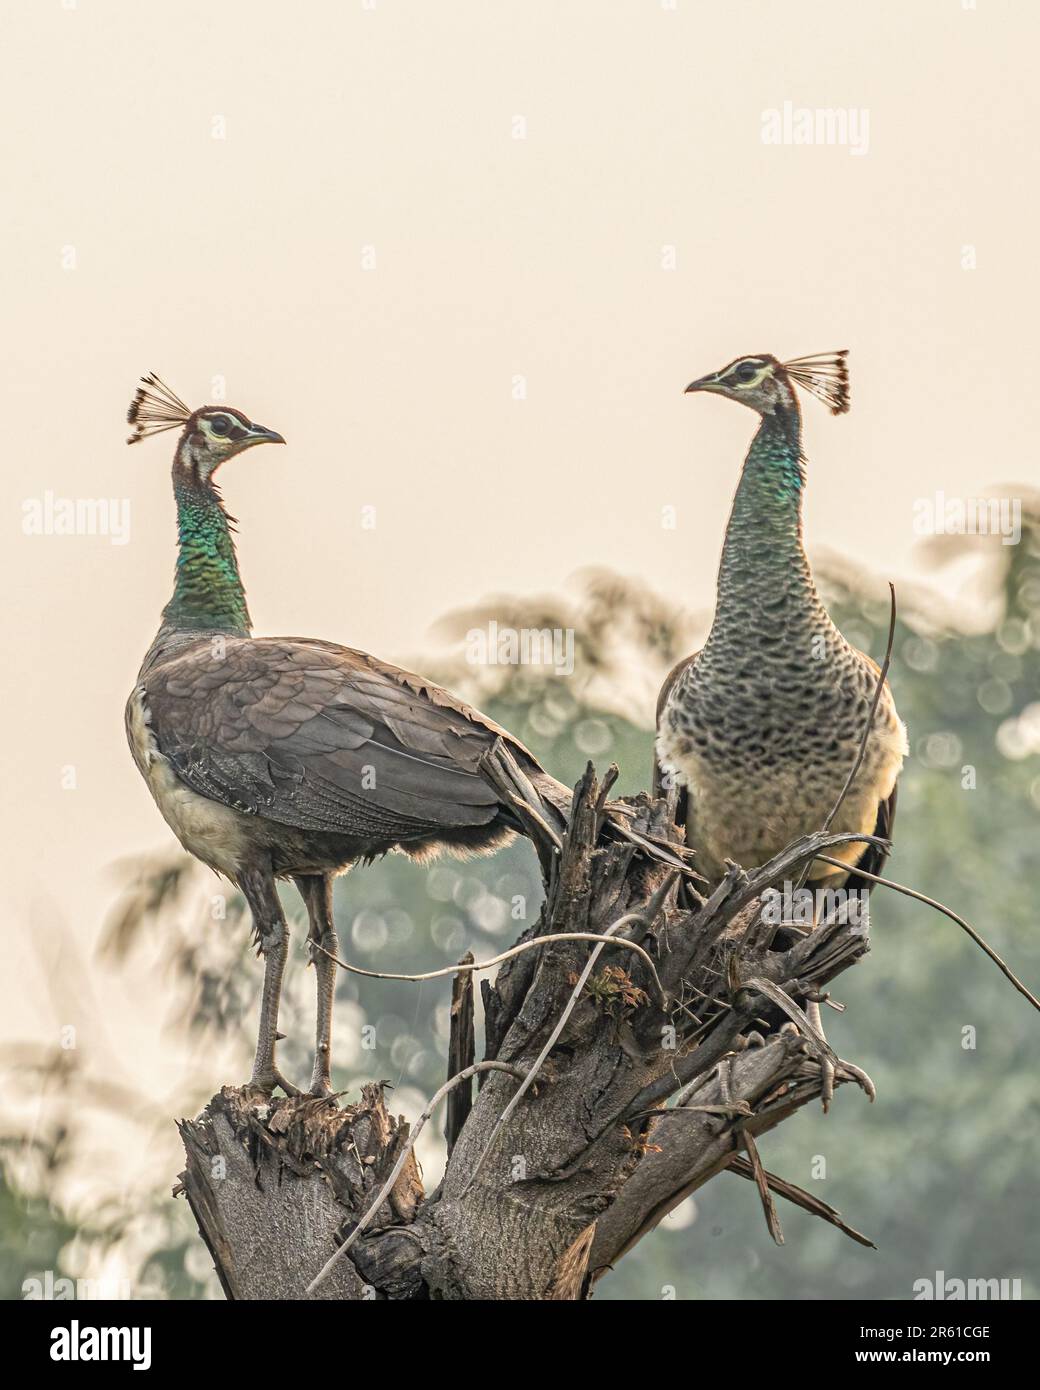 Two majestic Indian peafowls perched atop a tree trunk with lush green foliage in the background Stock Photo